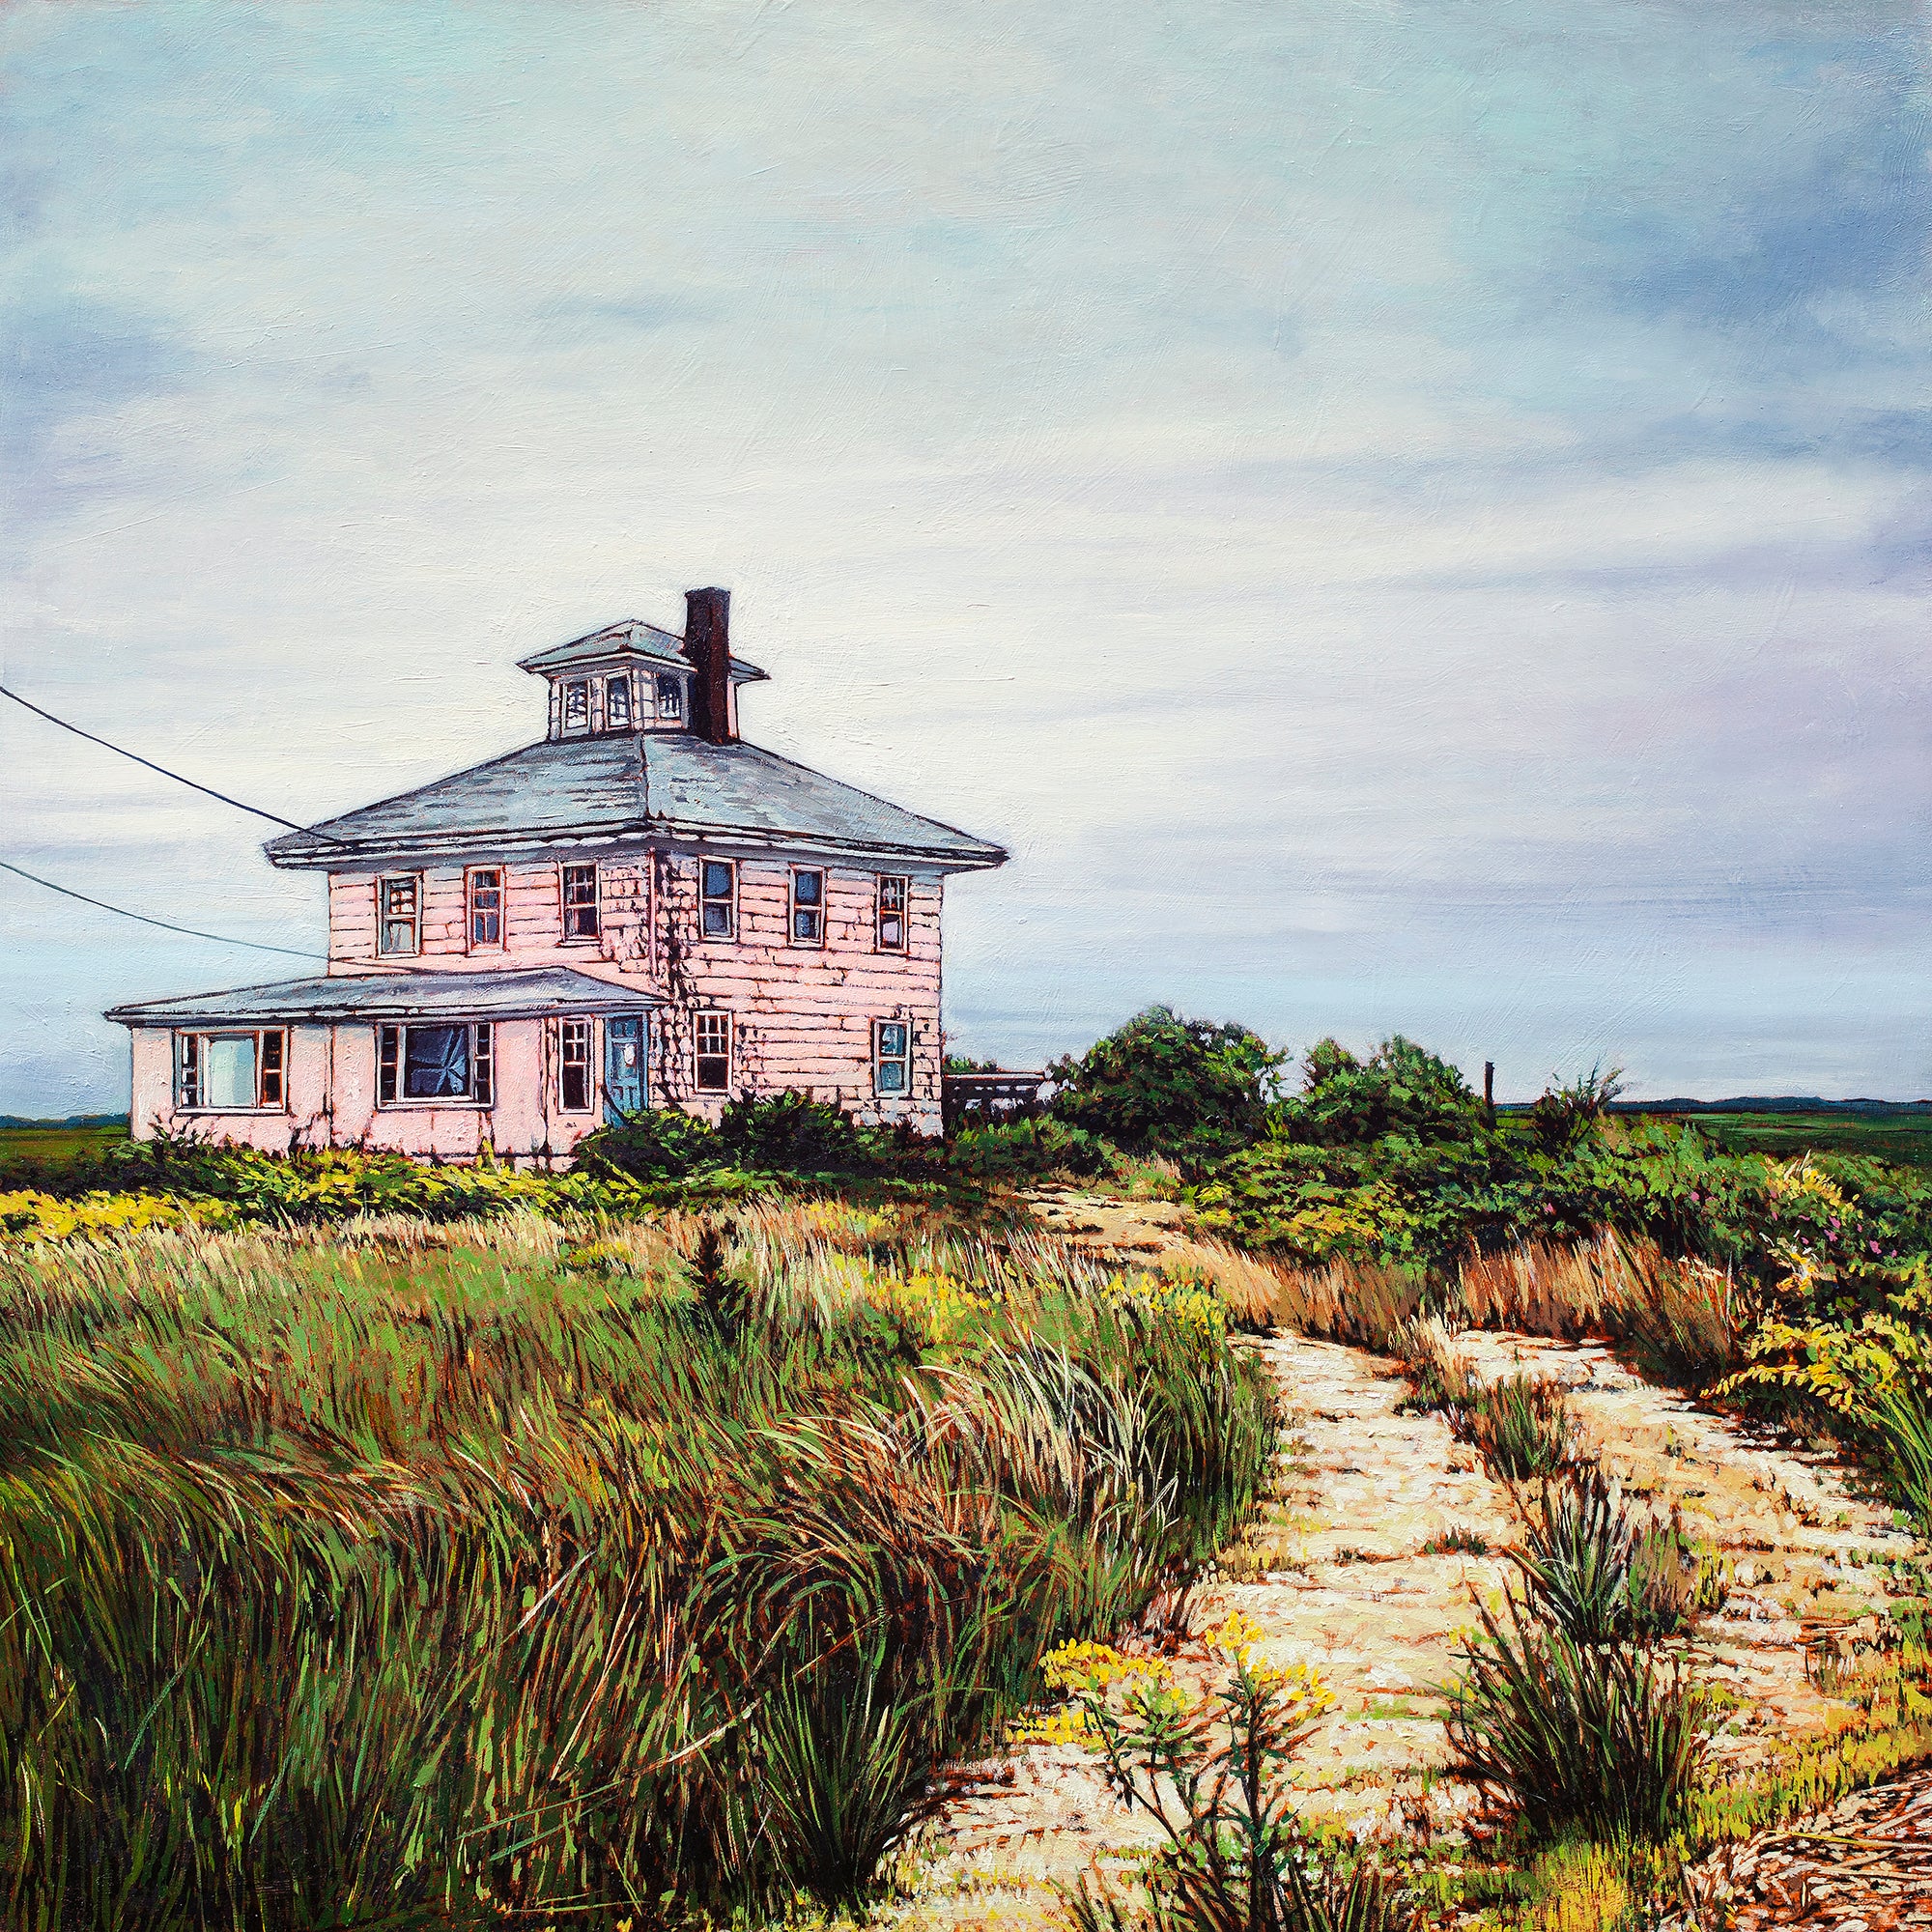 Andrew Houle: "The Pink House" - 12/7/23